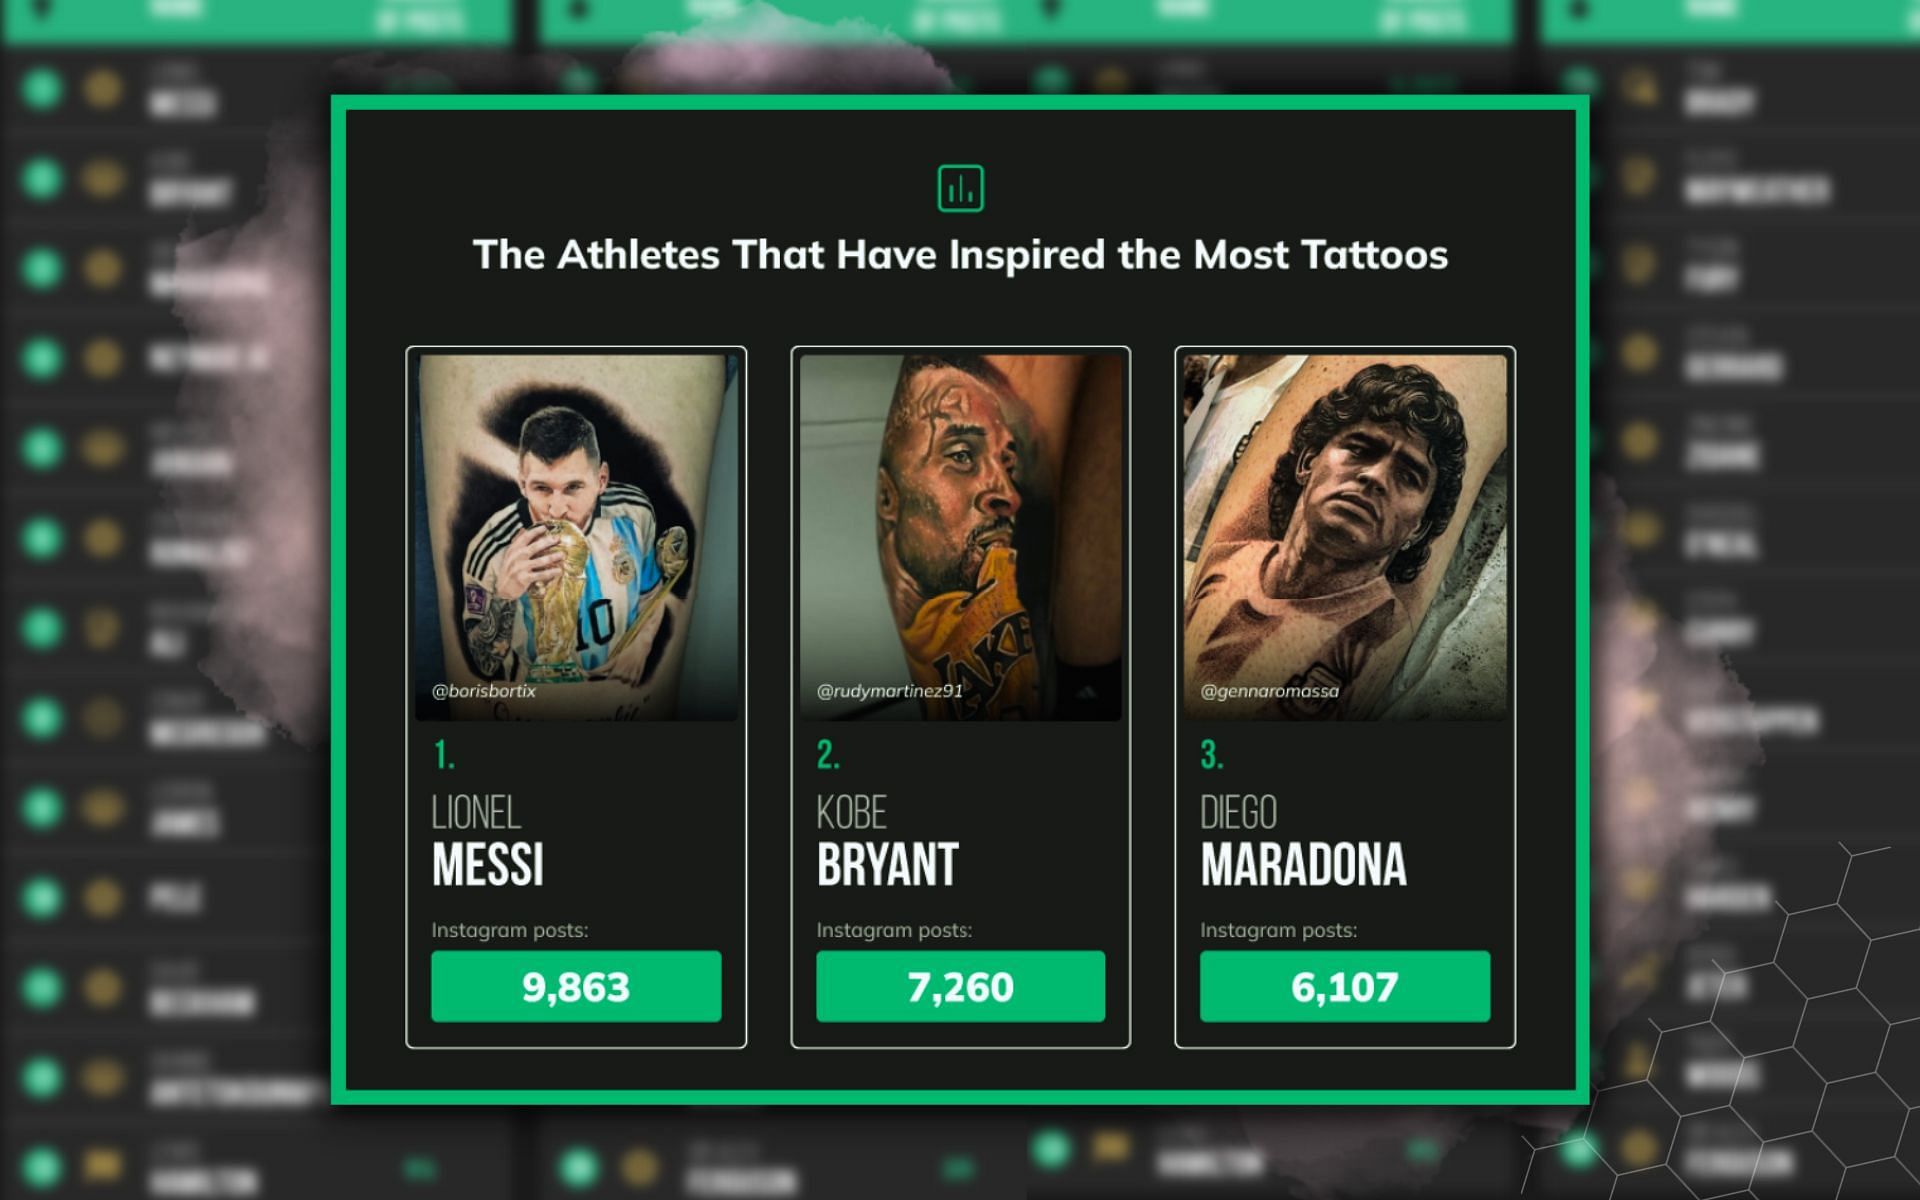 Betsperts features UFC athlete in list of sporting icons who inspire the most fan tattoos. [Image credits: Betsperts]